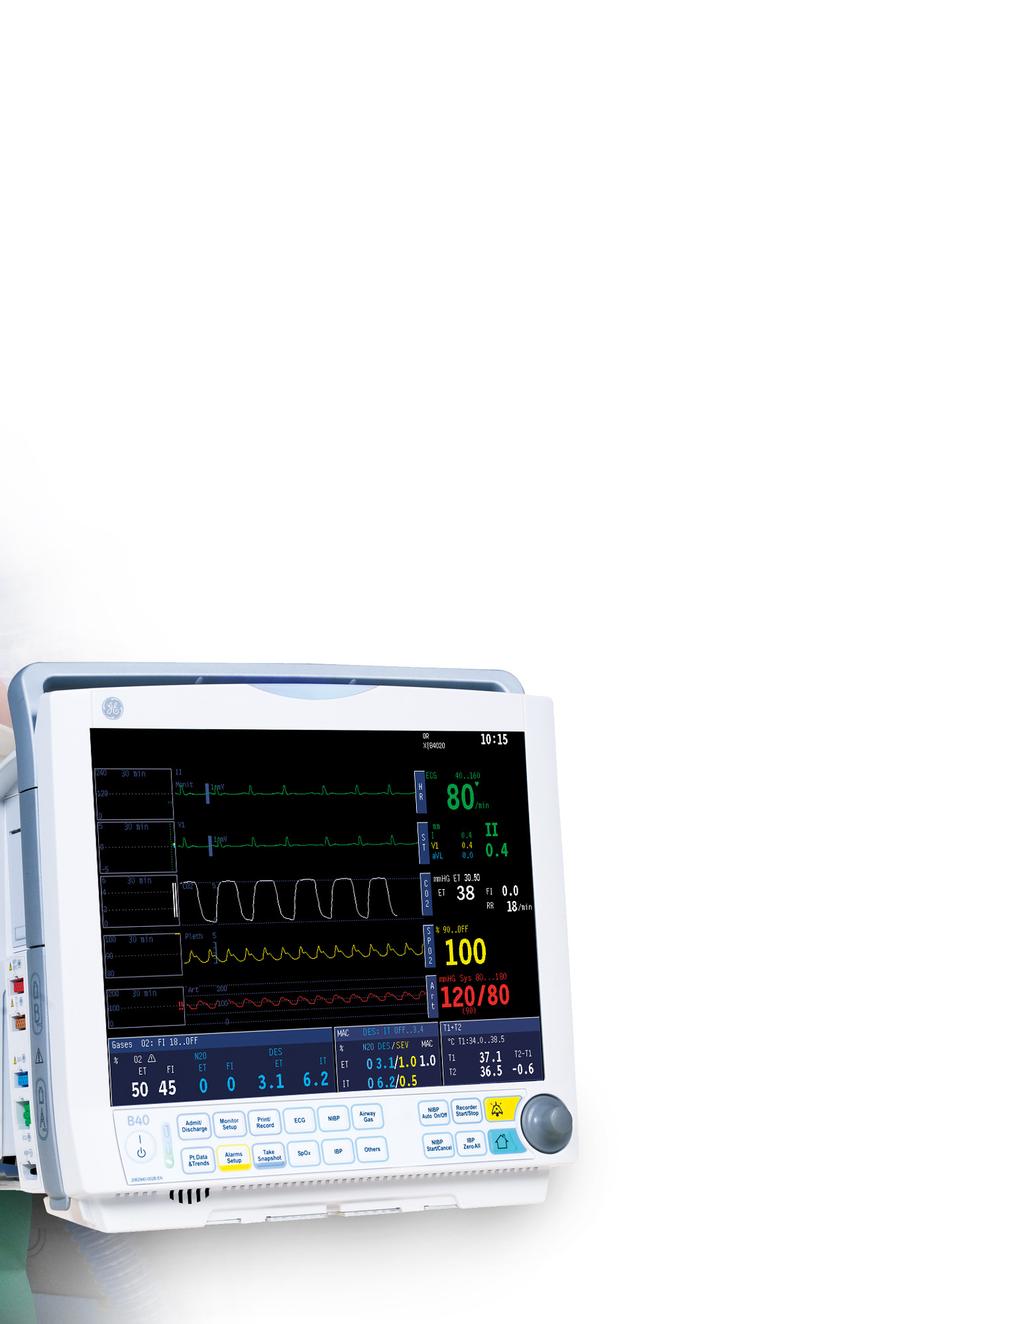 anced adaptability from ambulatory surgery to recovery room With its small footprint, the portable B40 Monitor fits easily into perioperative and specialty care areas as well as physician offices